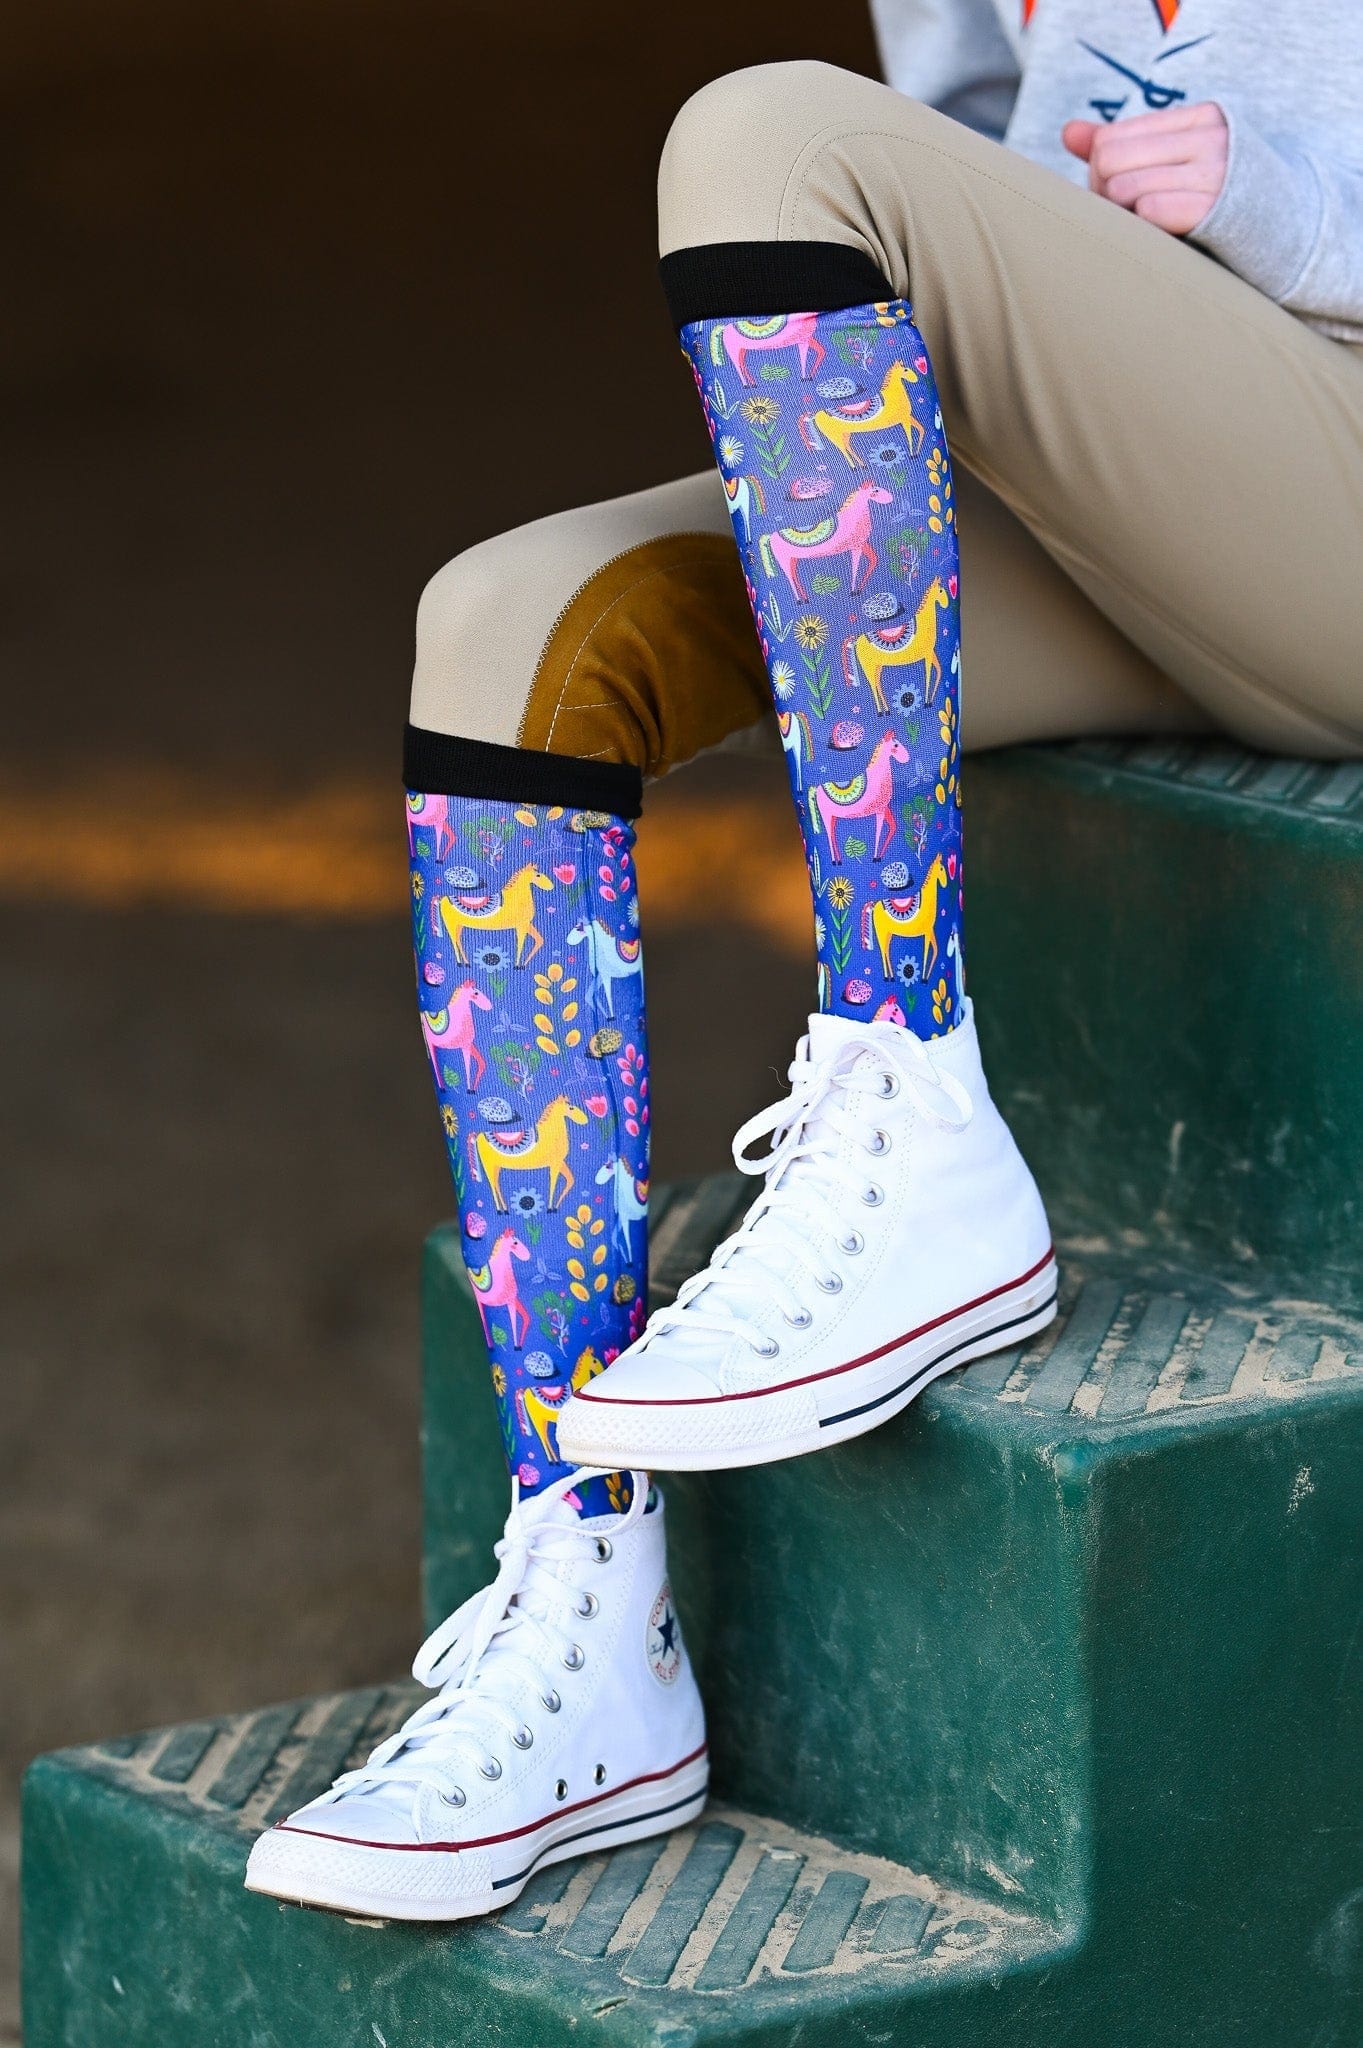 Dreamers & Schemers Socks Dreamers & Schemers- Cheval equestrian team apparel online tack store mobile tack store custom farm apparel custom show stable clothing equestrian lifestyle horse show clothing riding clothes horses equestrian tack store